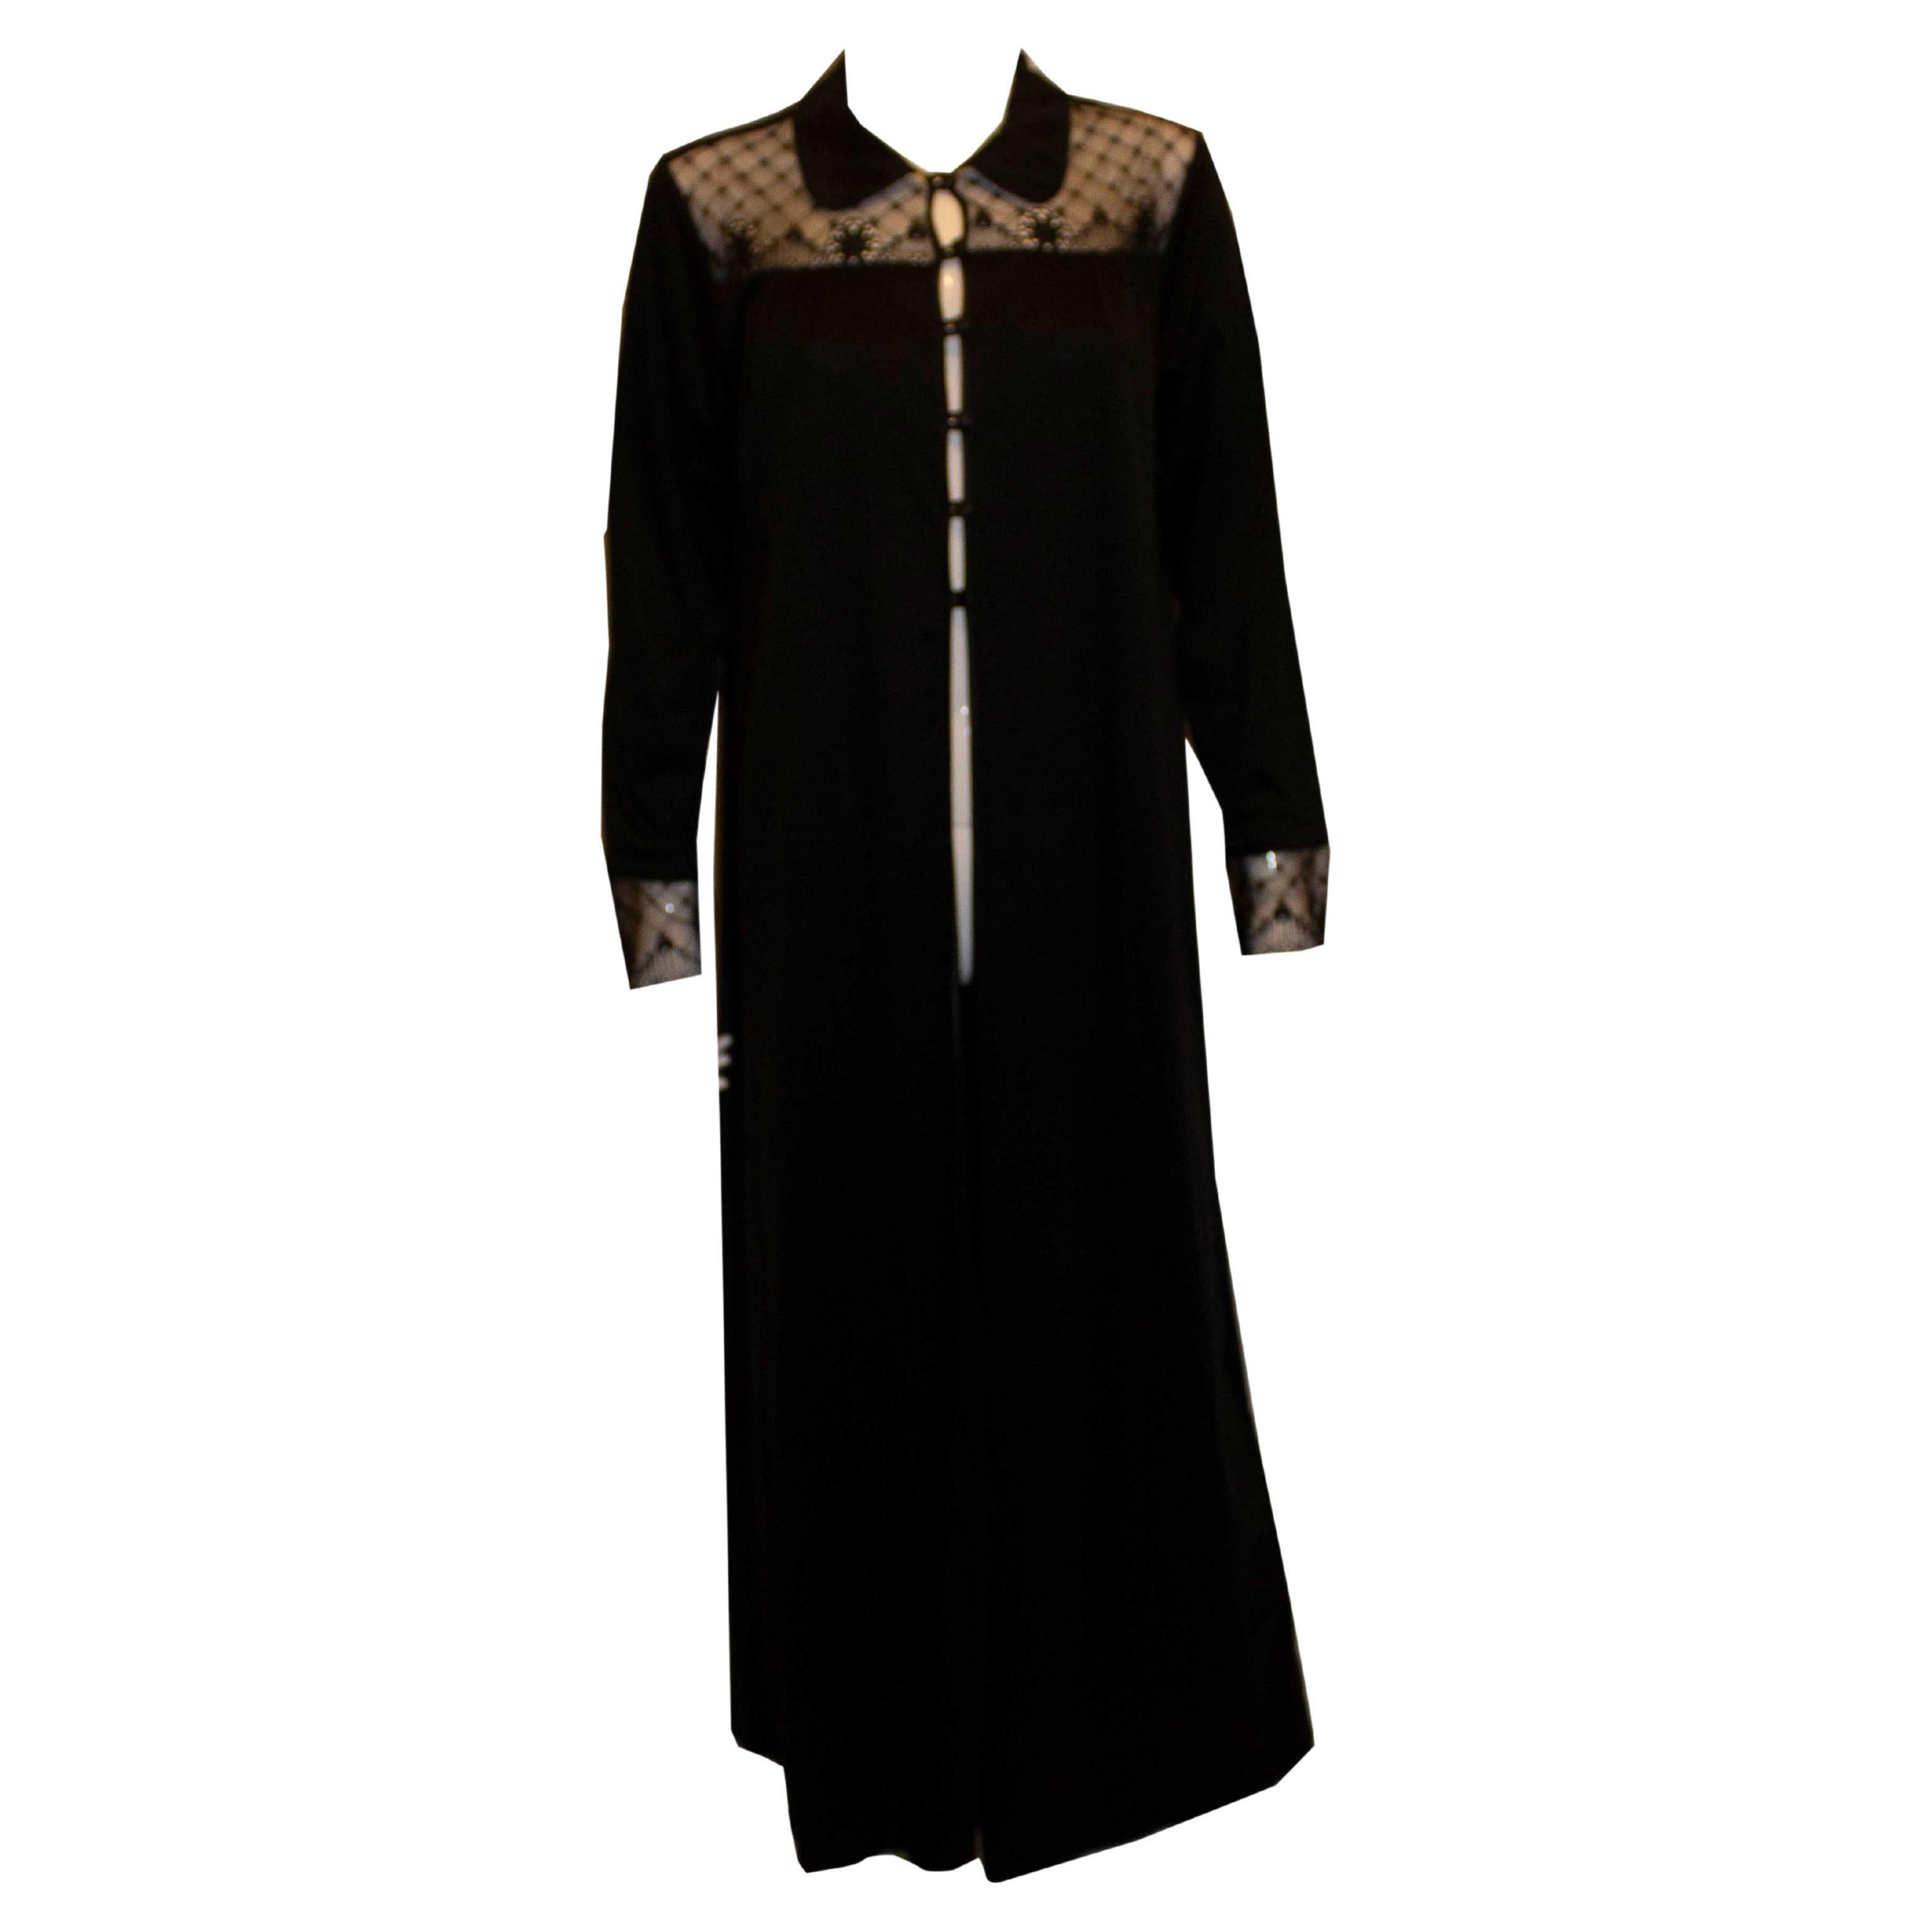 Hanro Black Cotton and Lace Dressing Coat For Sale